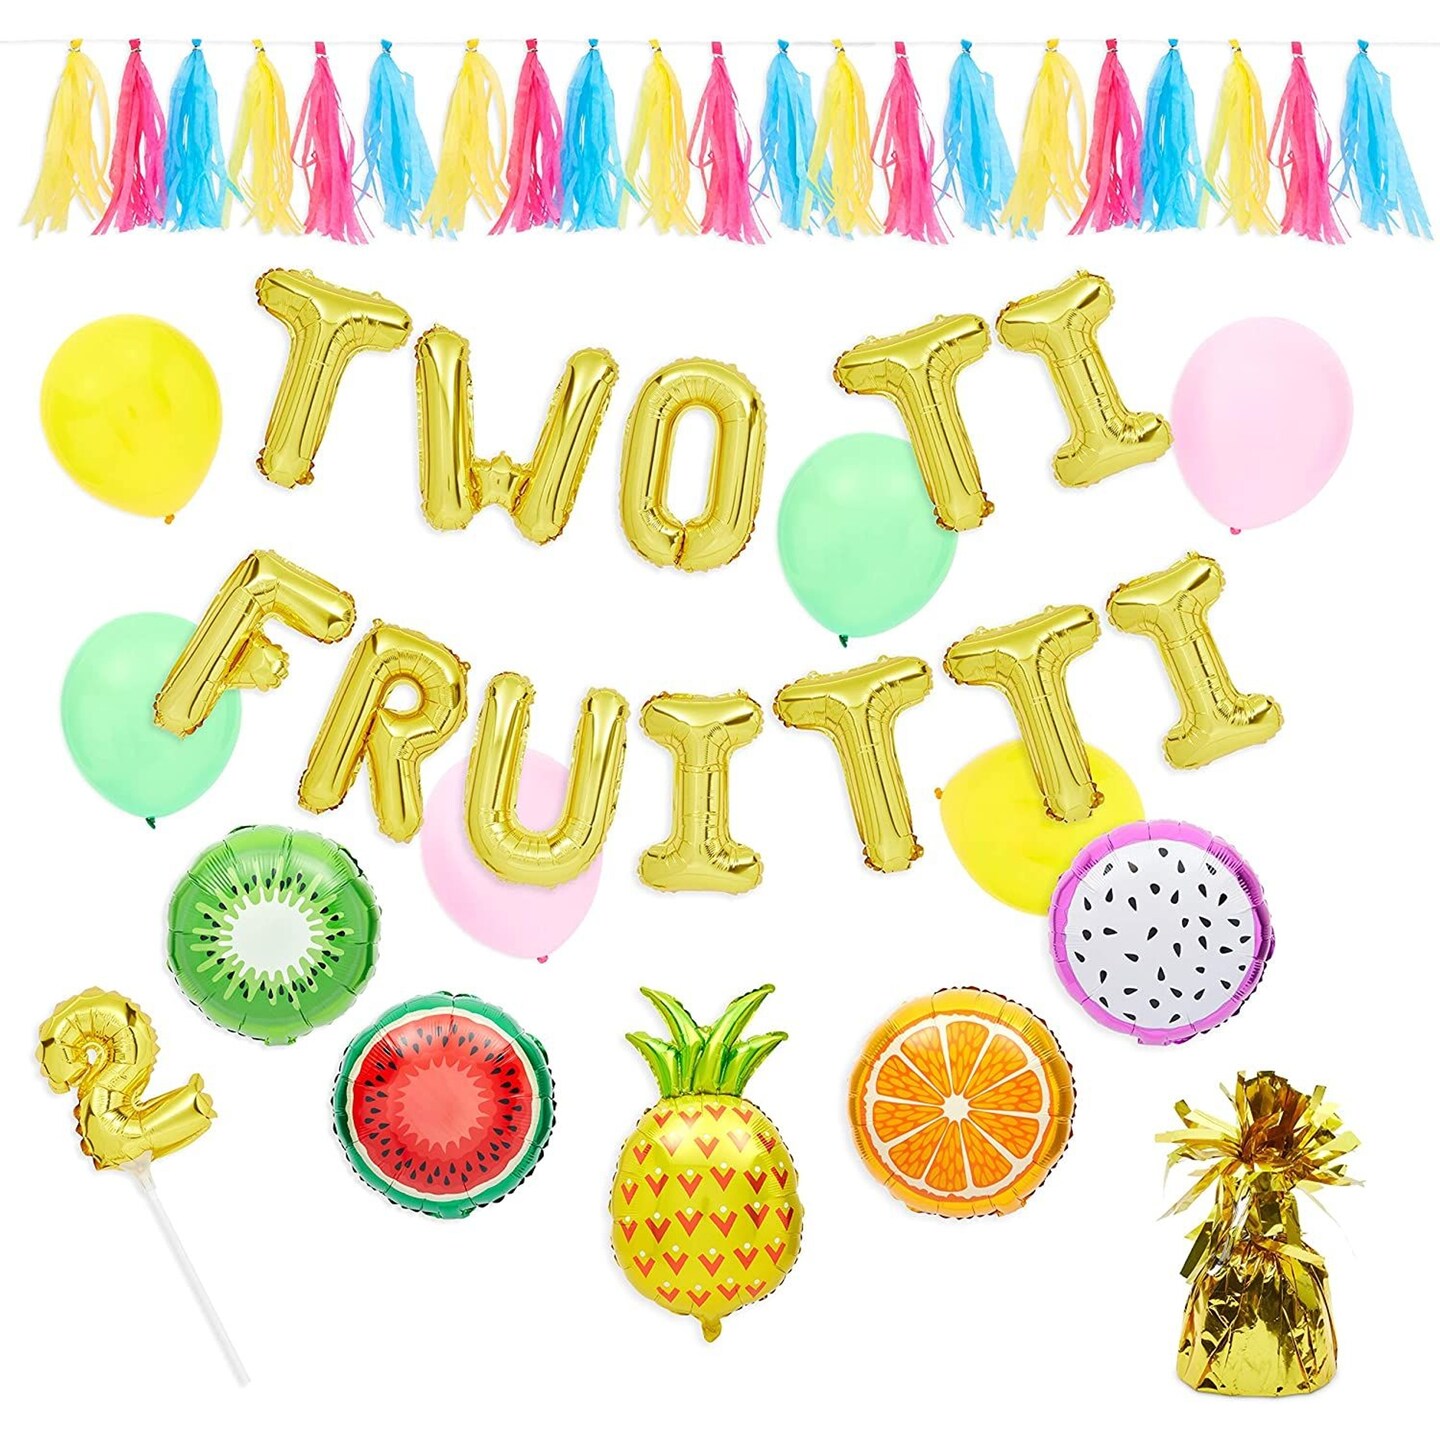 2nd Birthday Decorations, Fruit Balloon Garland, Cake Topper, Banner (38 Pieces)